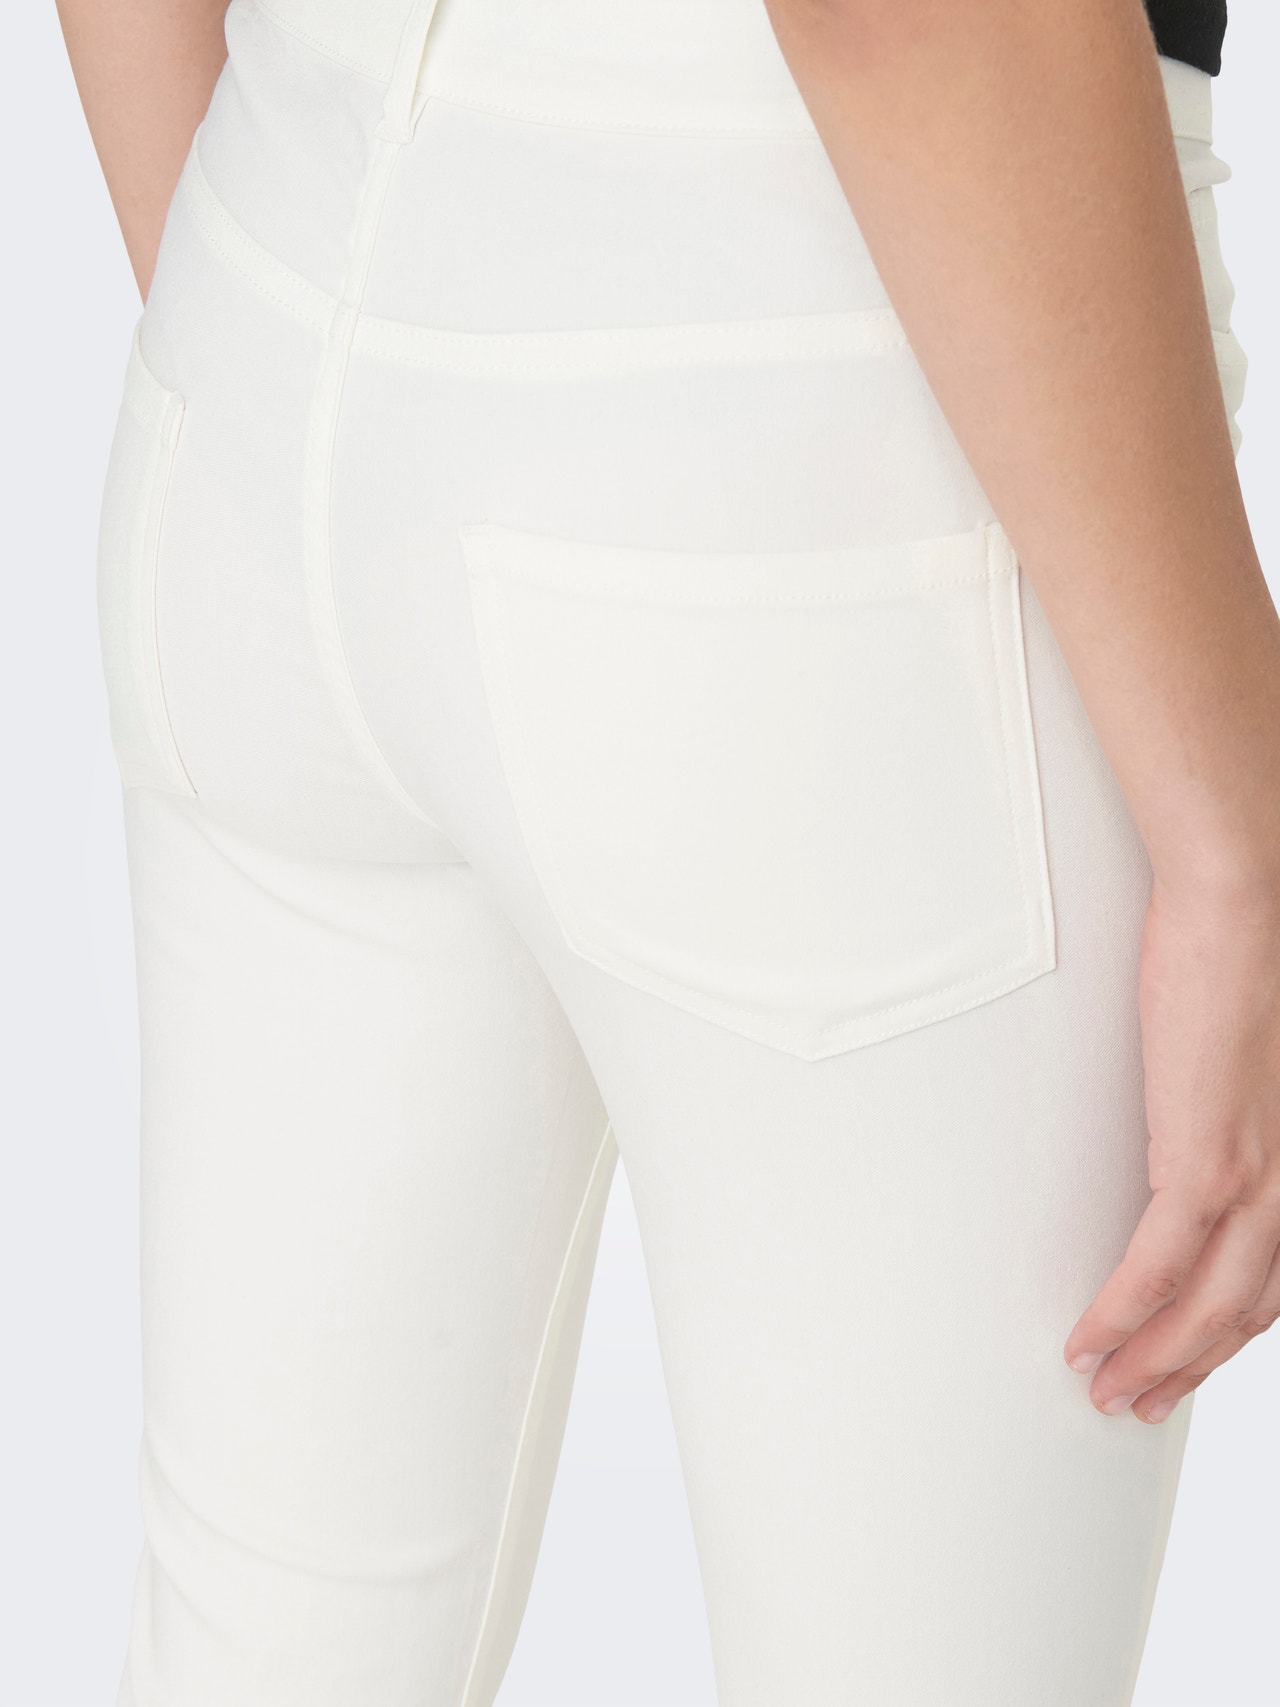 ONLY Skinny trousers with mid waist -Cloud Dancer - 15291267